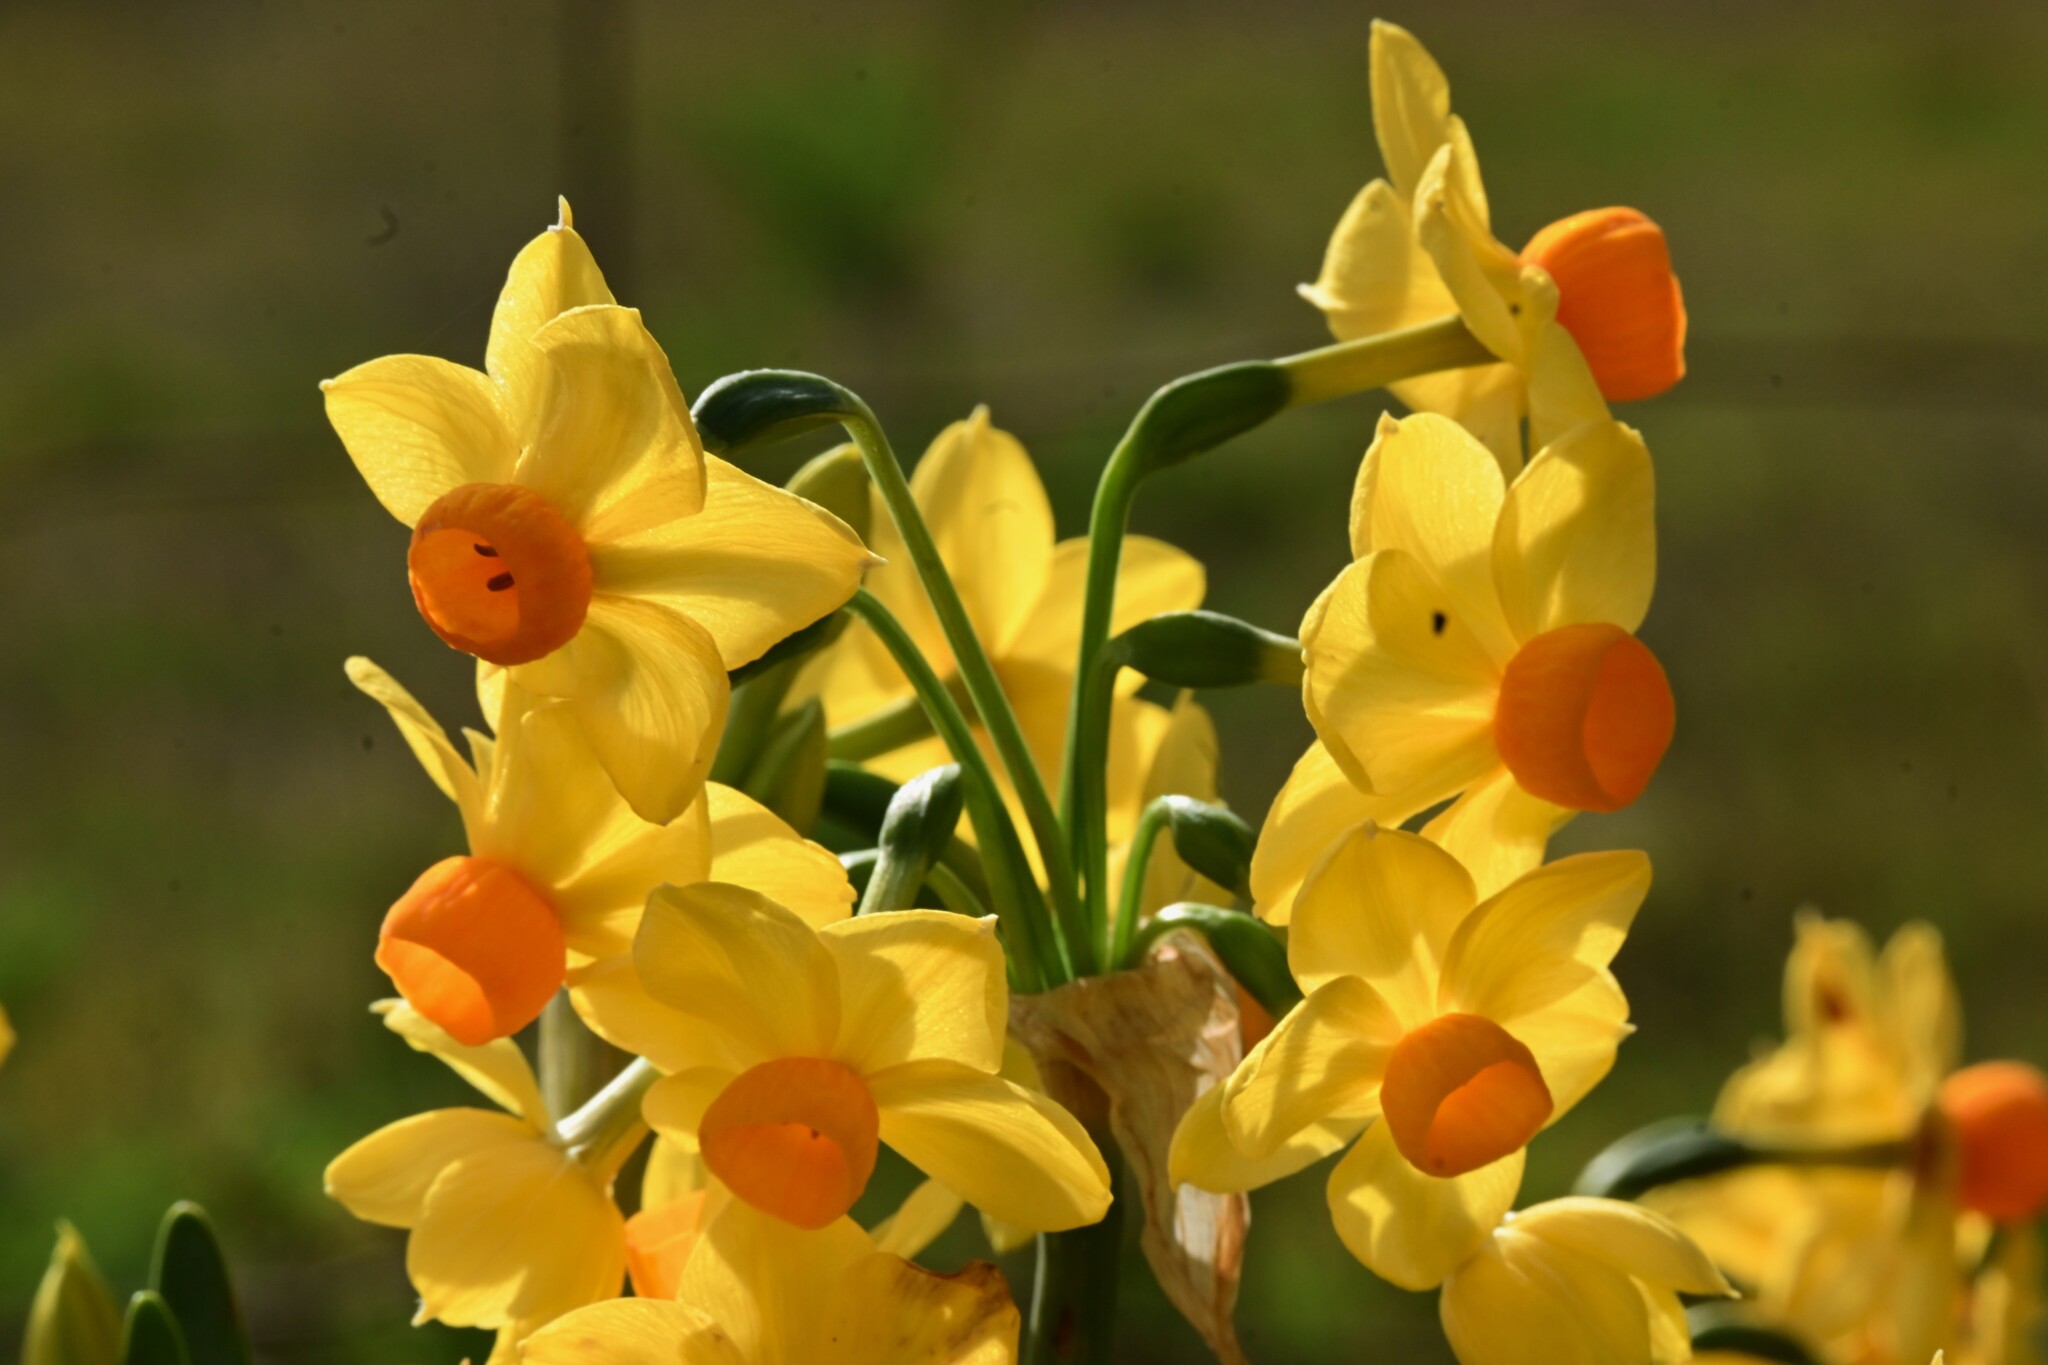 PLANT OF THE WEEK #67: Rubbish jonquils